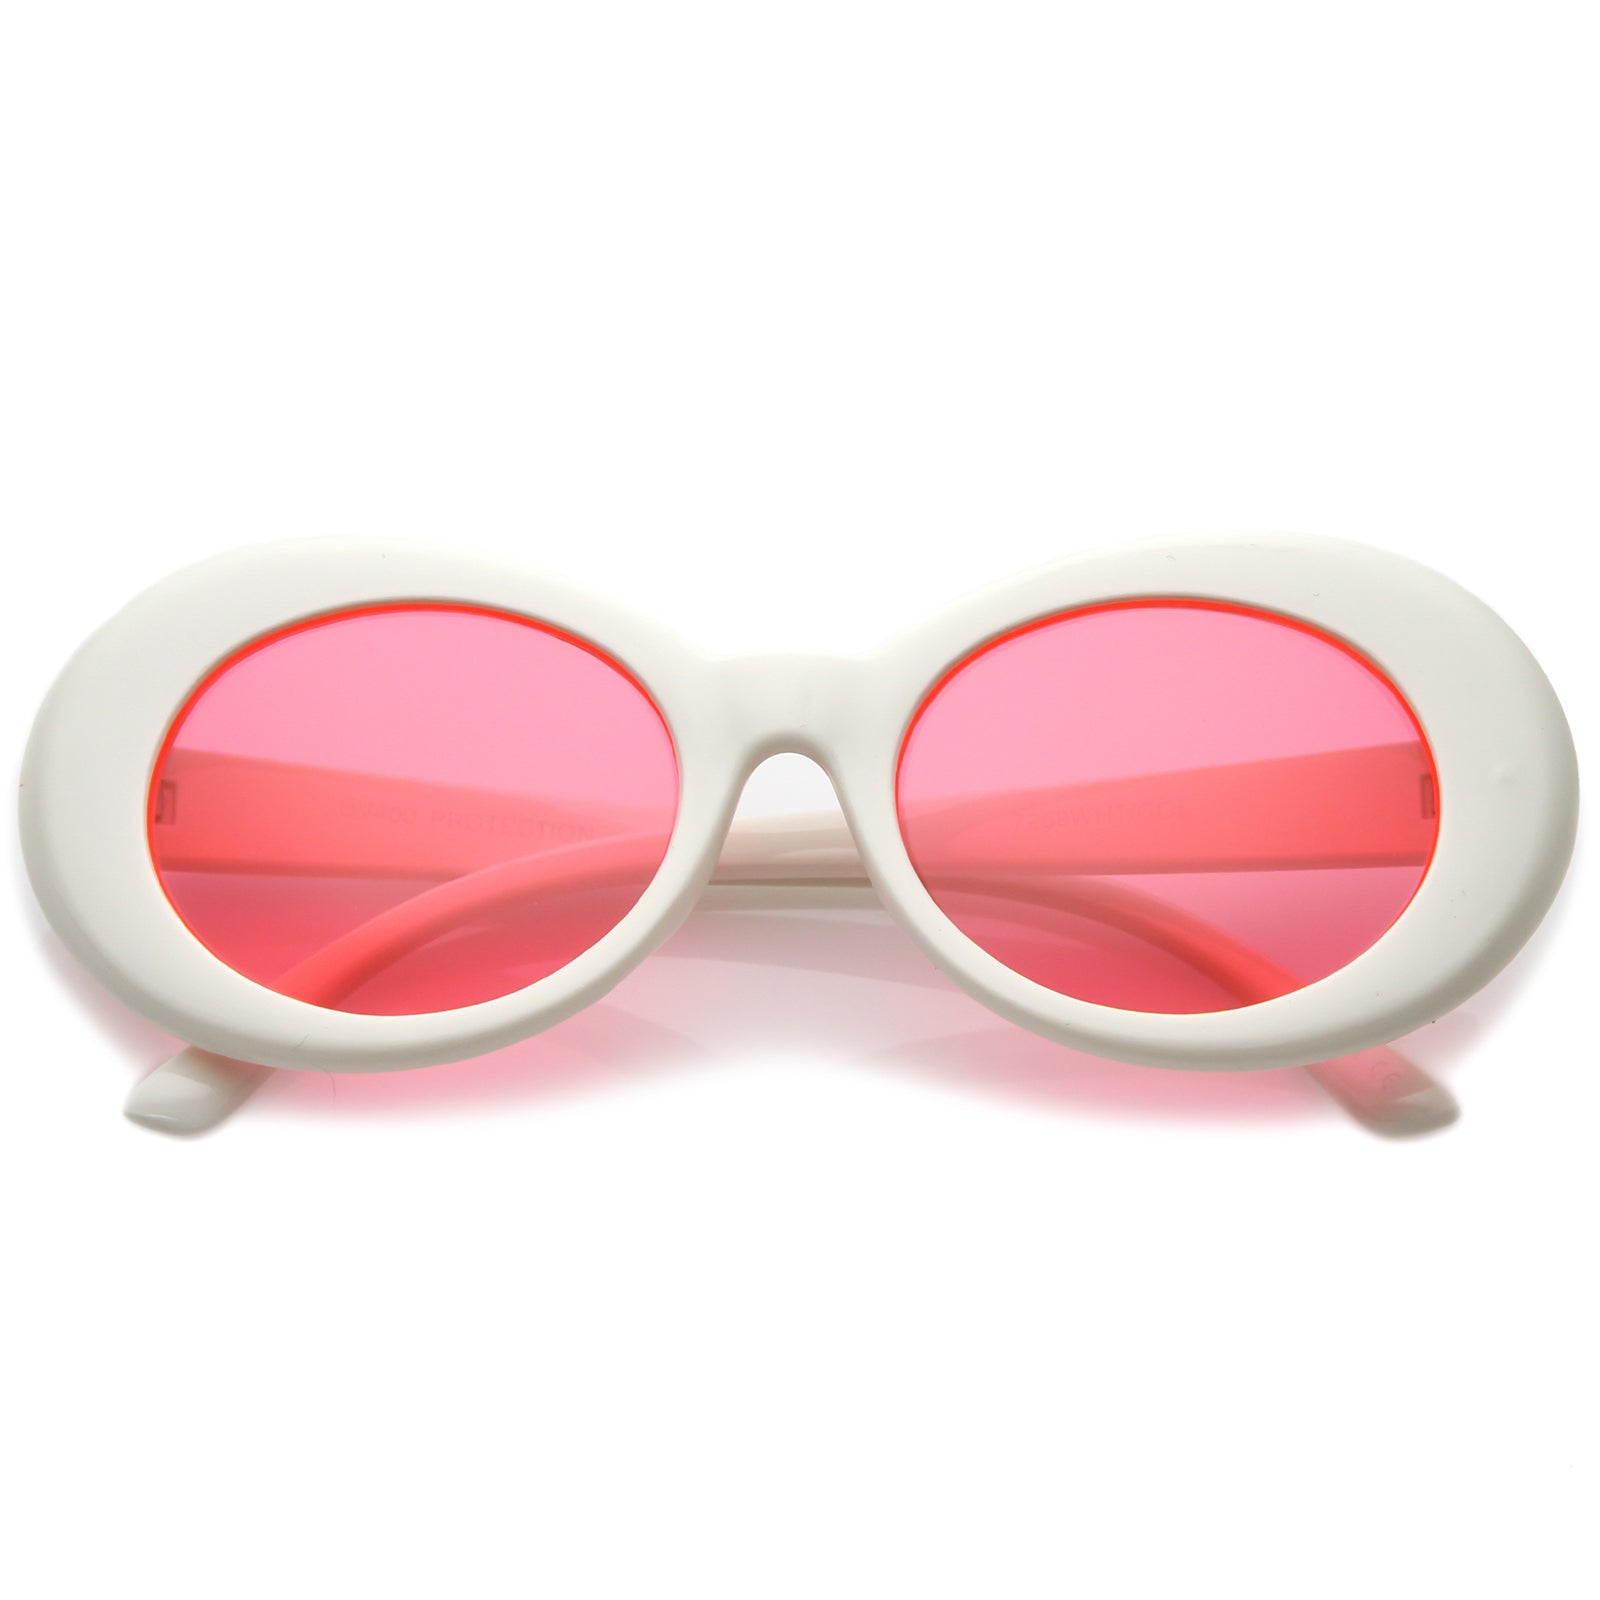 Retro White Oval Sunglasses With Tapered Arms Colored Round Lens 51mm Sunglass La